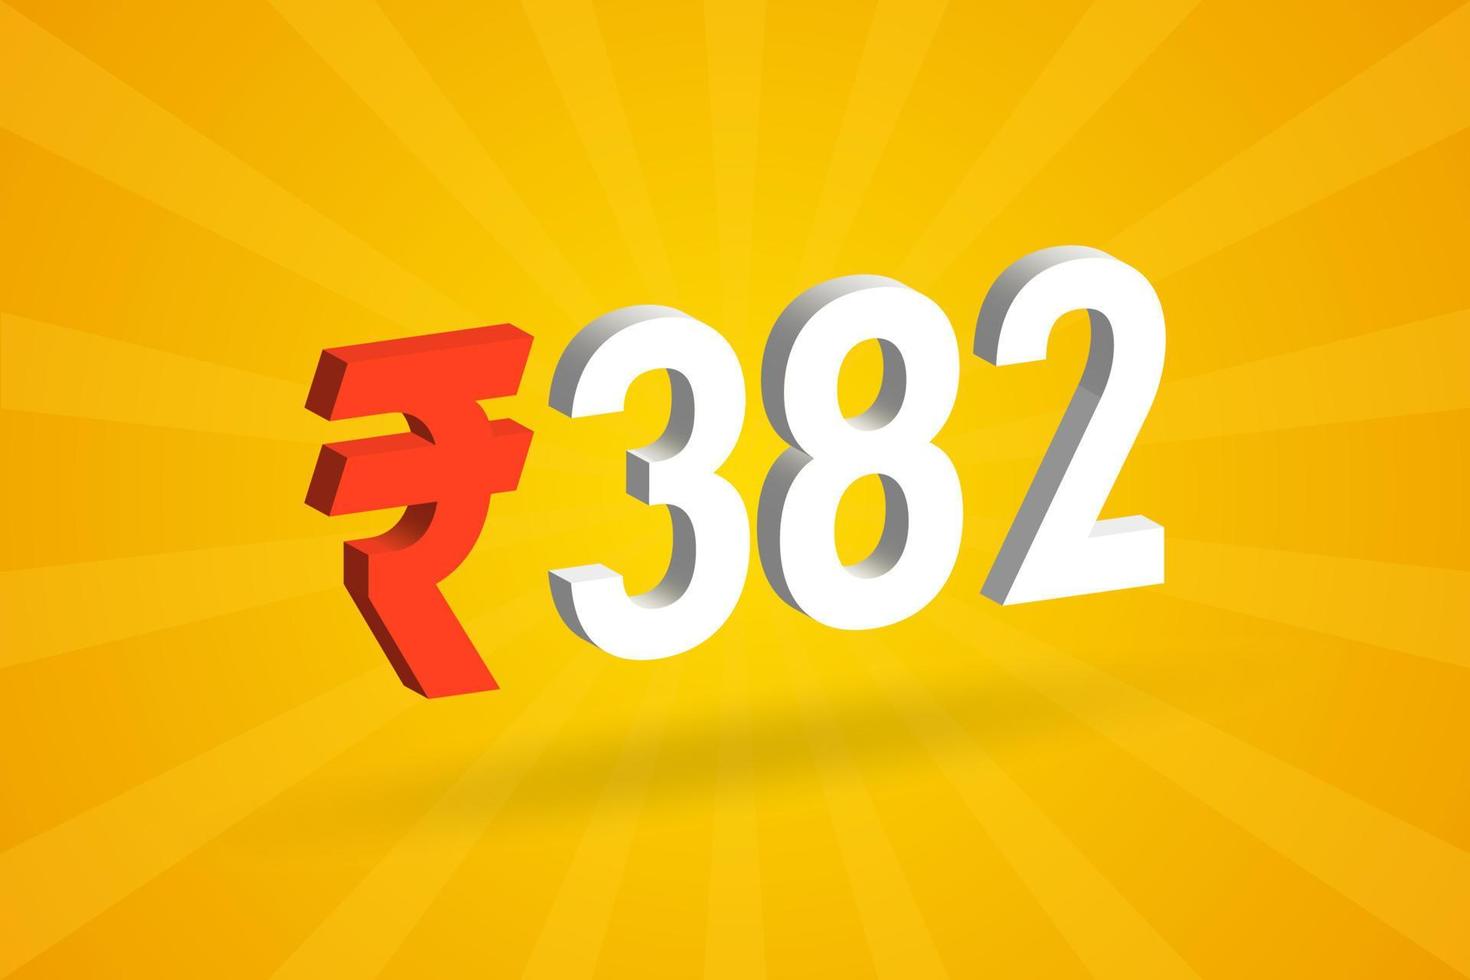 382 Rupee 3D symbol bold text vector image. 3D 382 Indian Rupee currency sign vector illustration